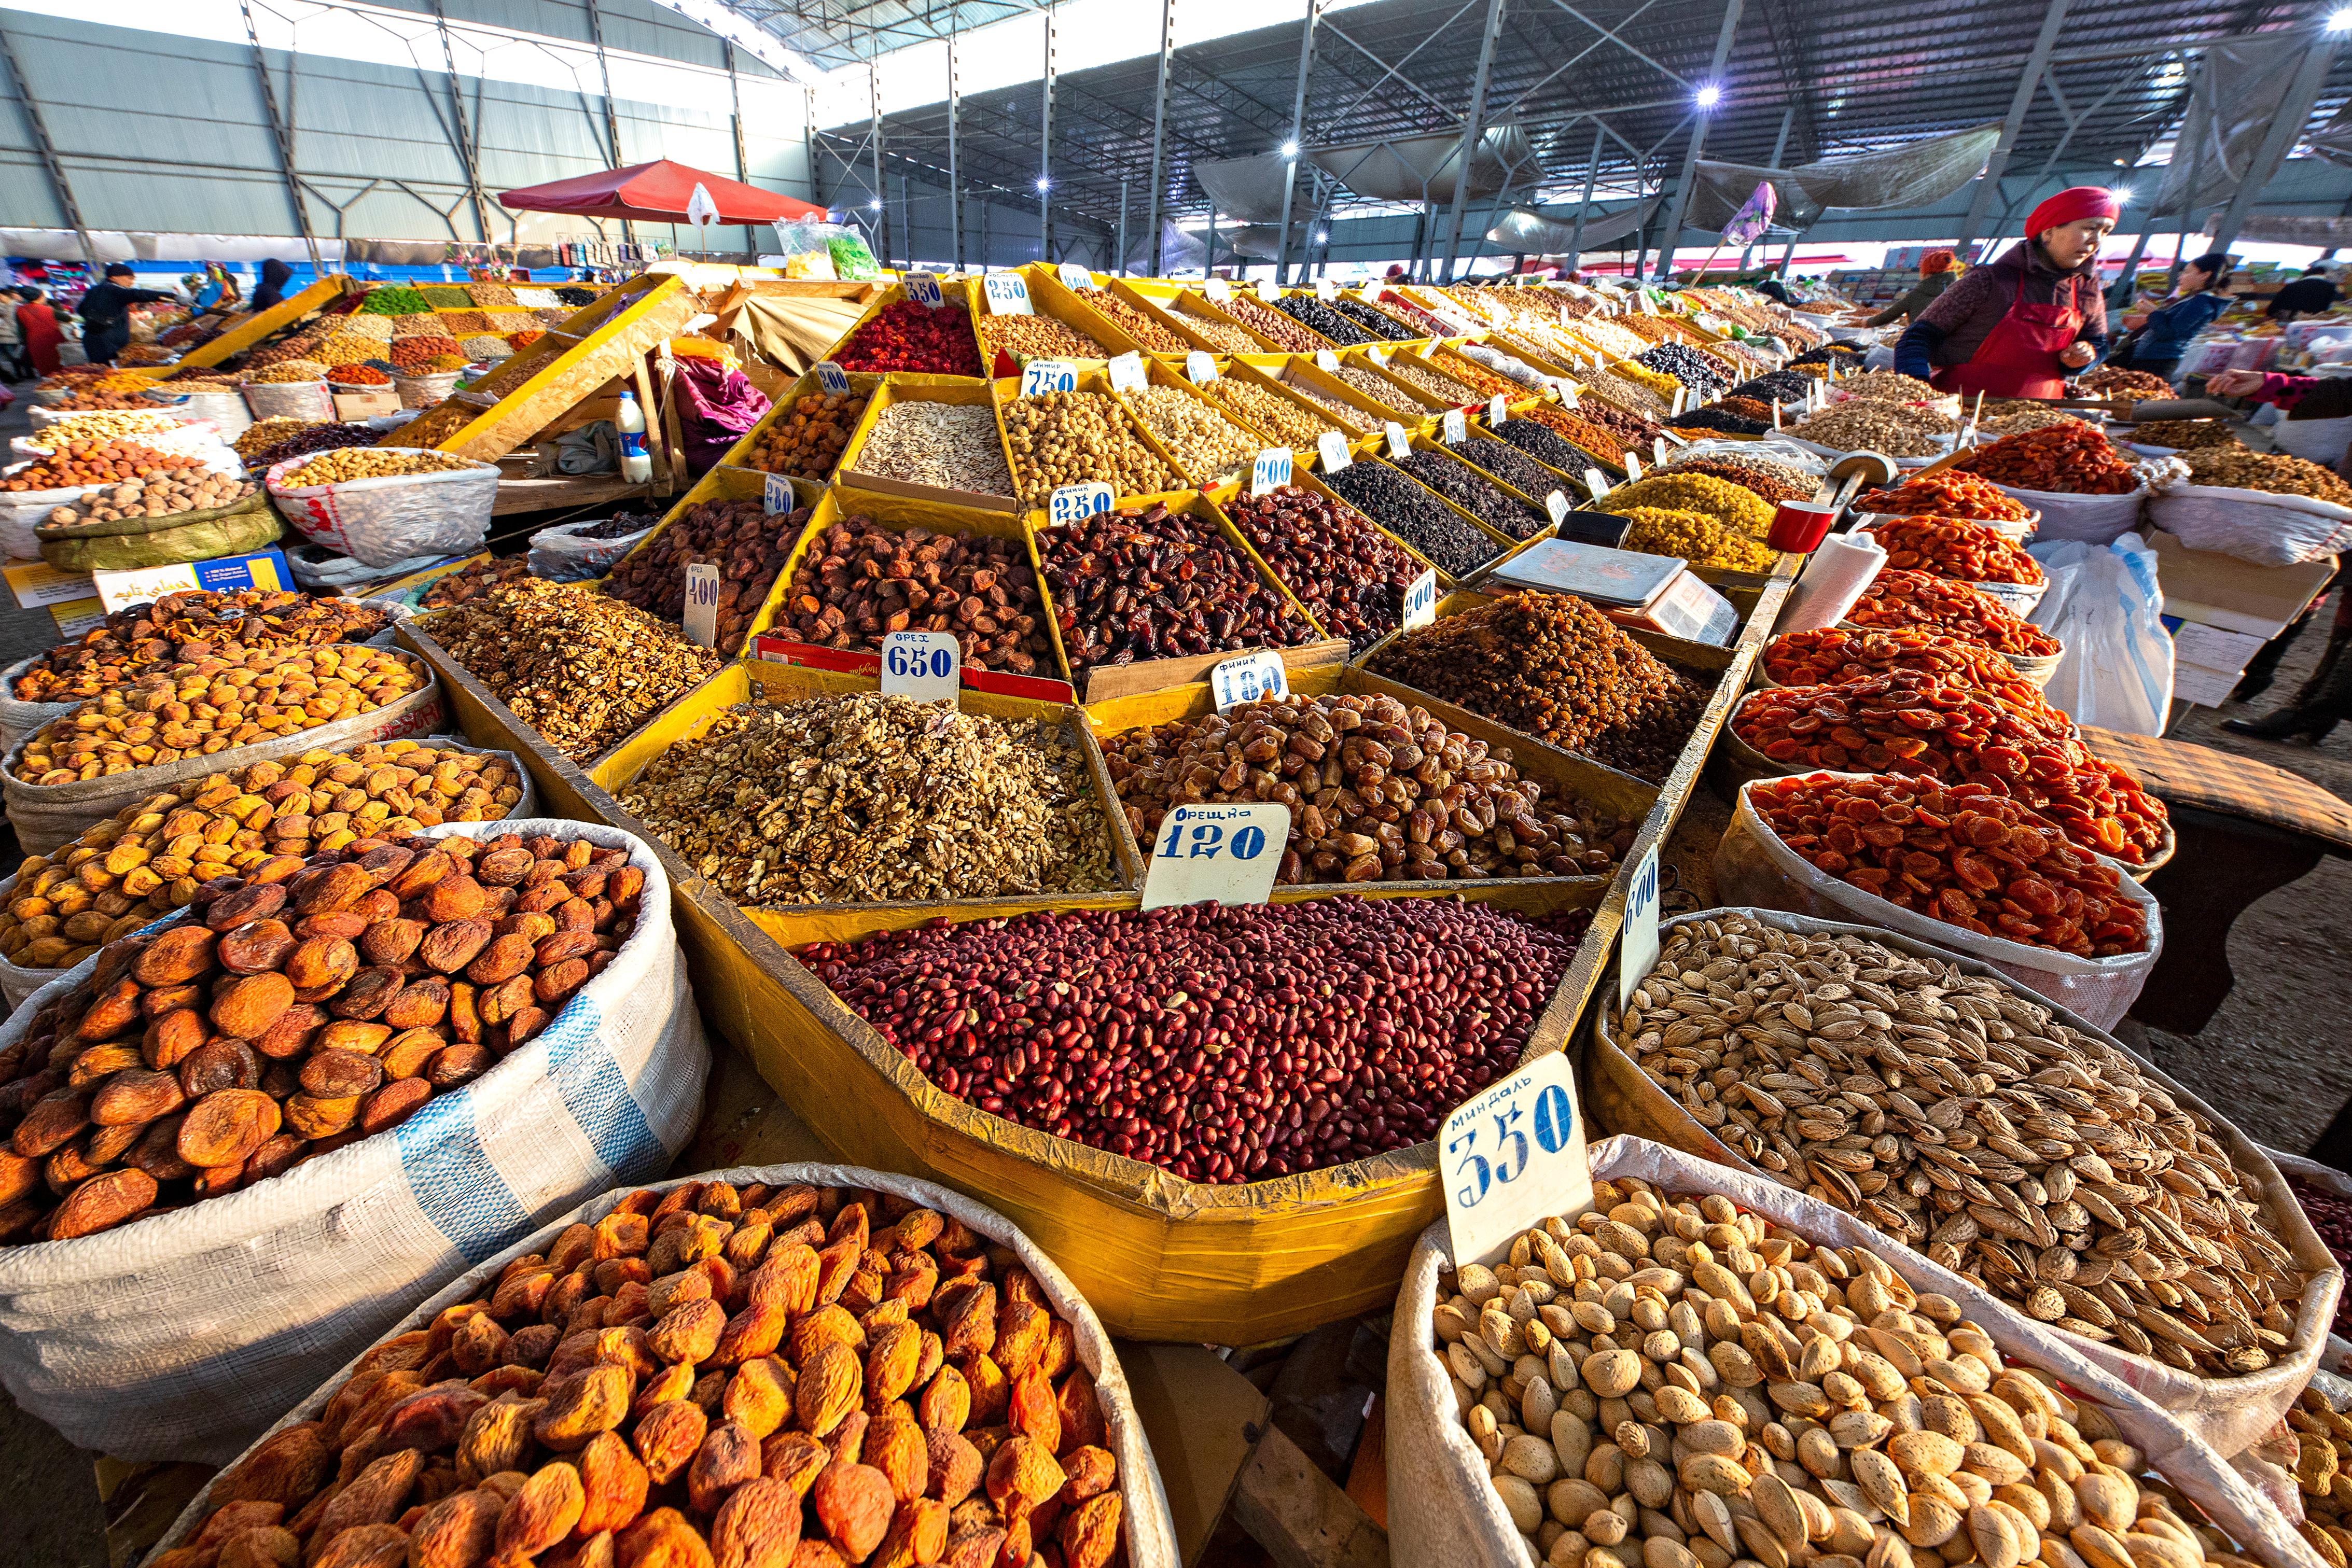 Spices, grains, and dried fruit being sold at the Bazaar - Photo by  MehmetO / Shutterstock.com